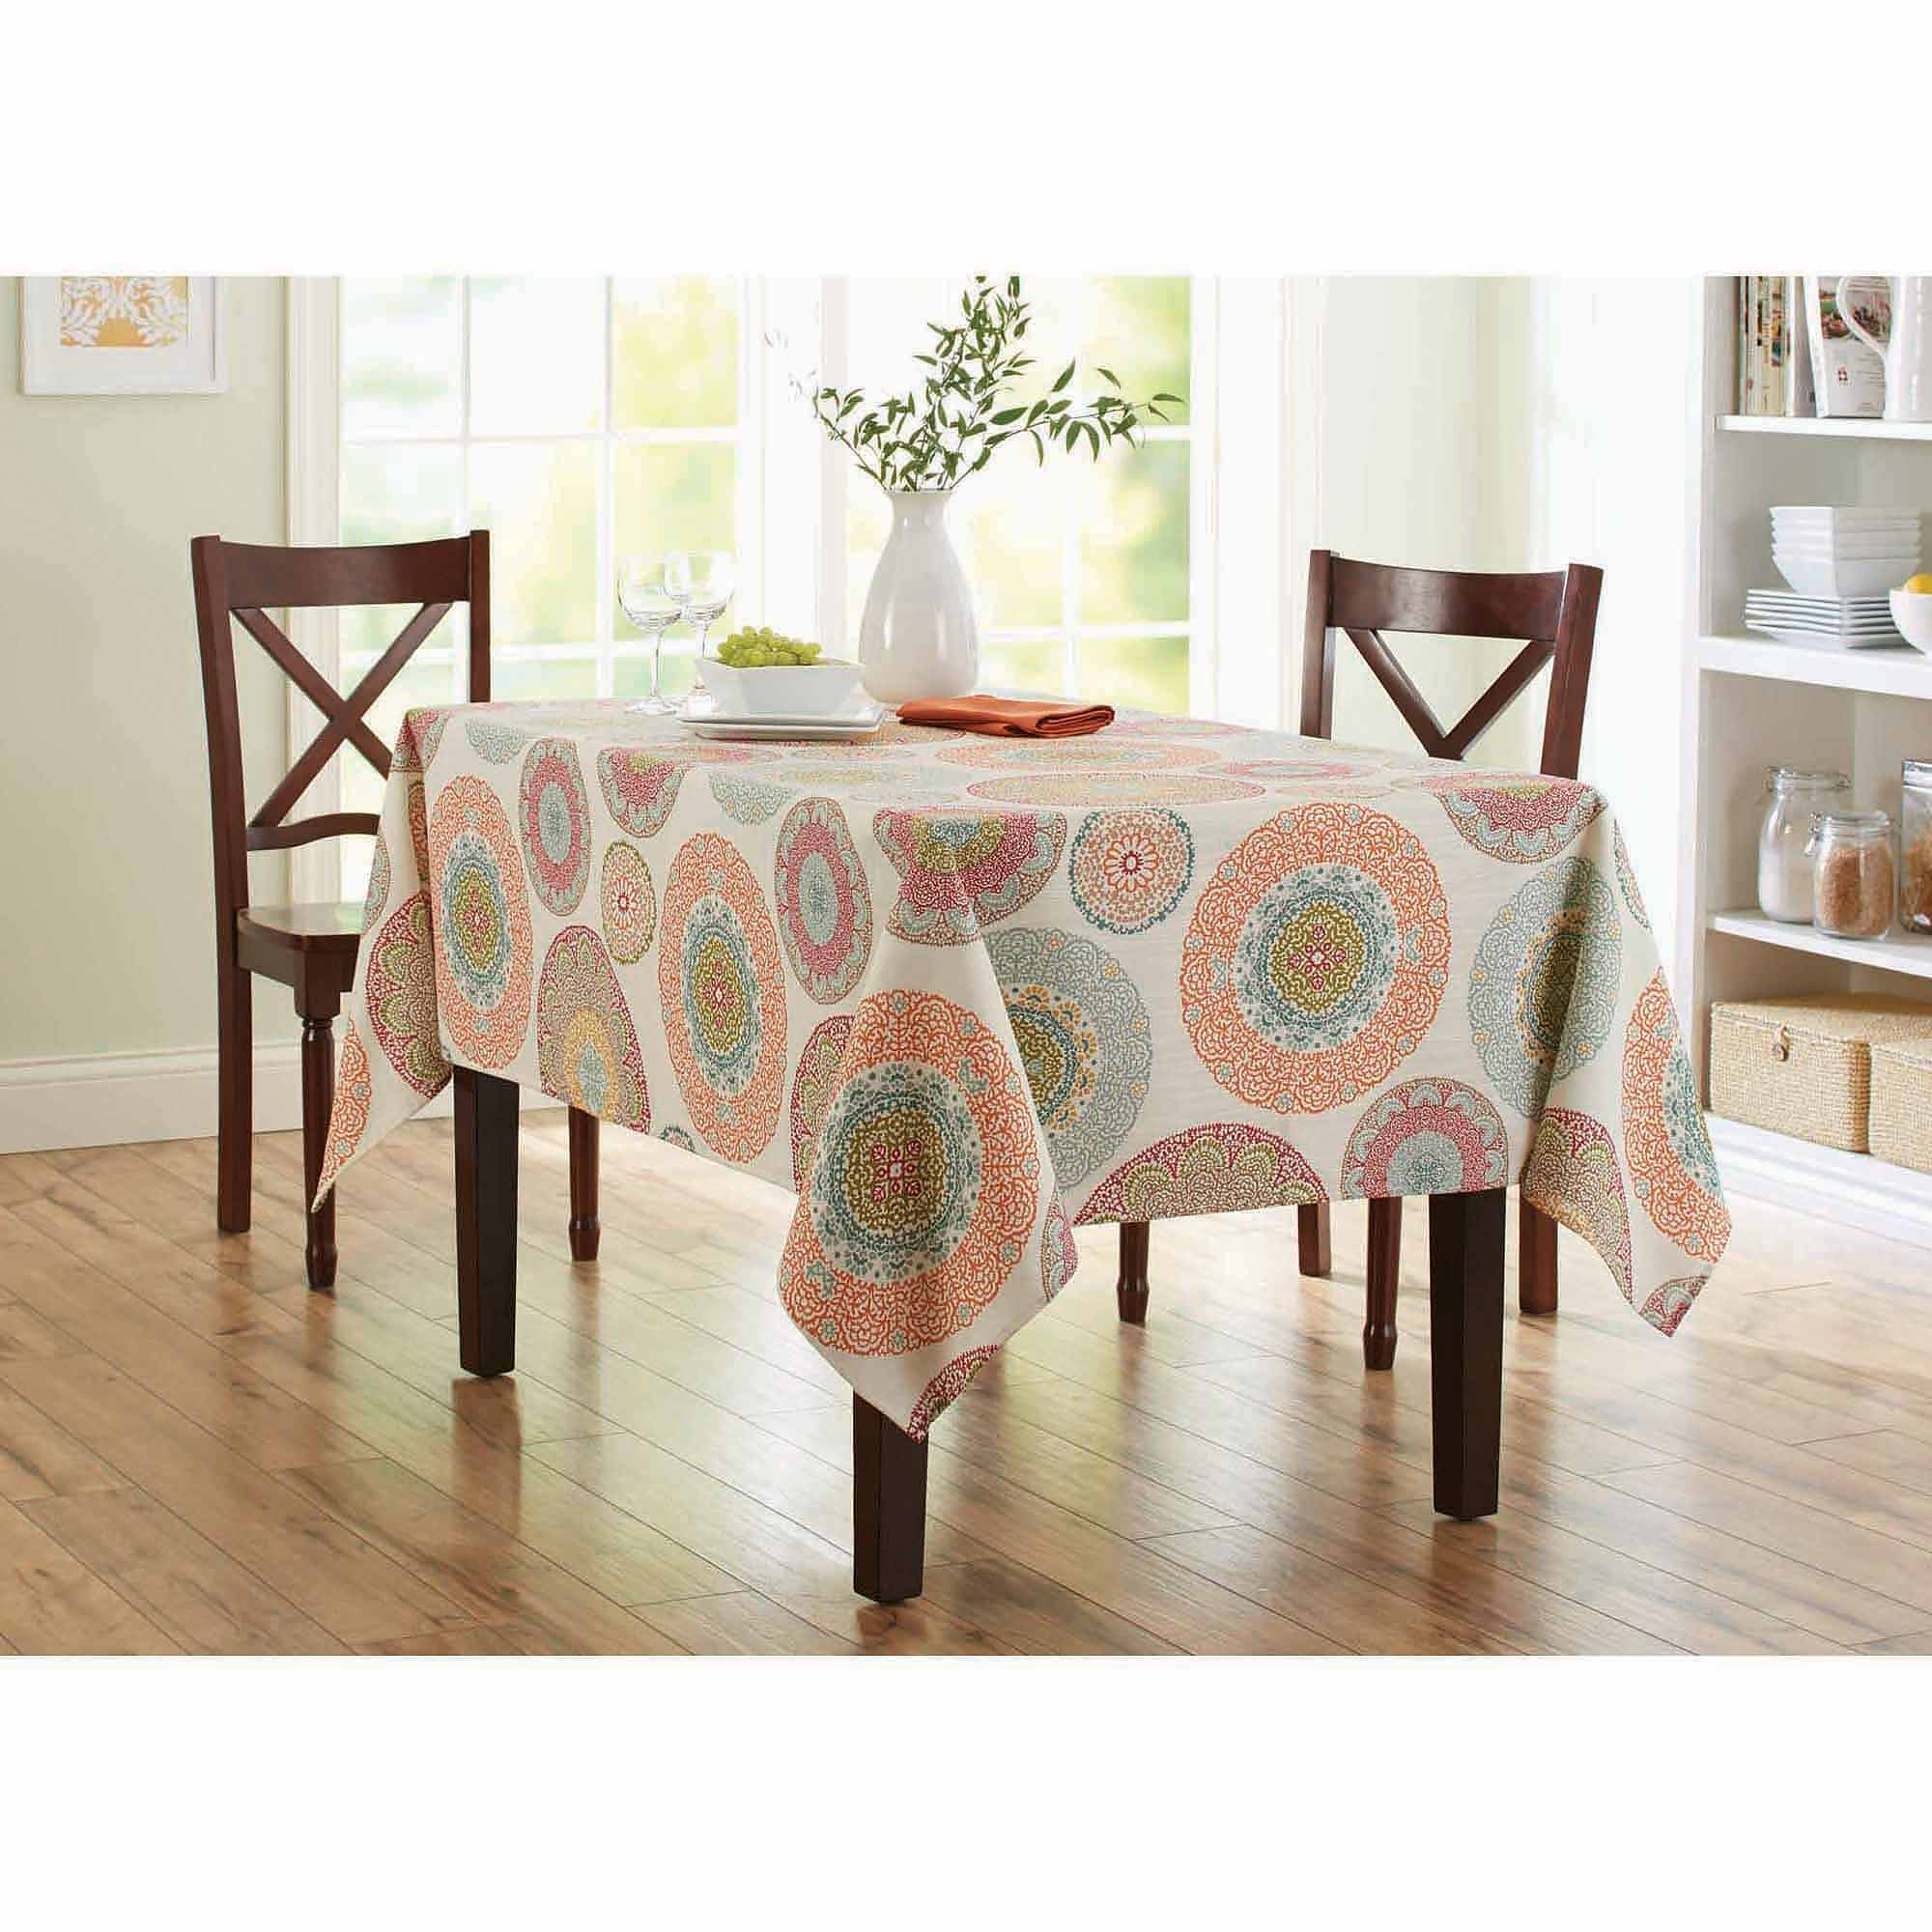 tablecloth for round accent table and better homes gardens lace medallion available with ceiling lights slim hallway console outdoor mats ashley furniture end tables coffee